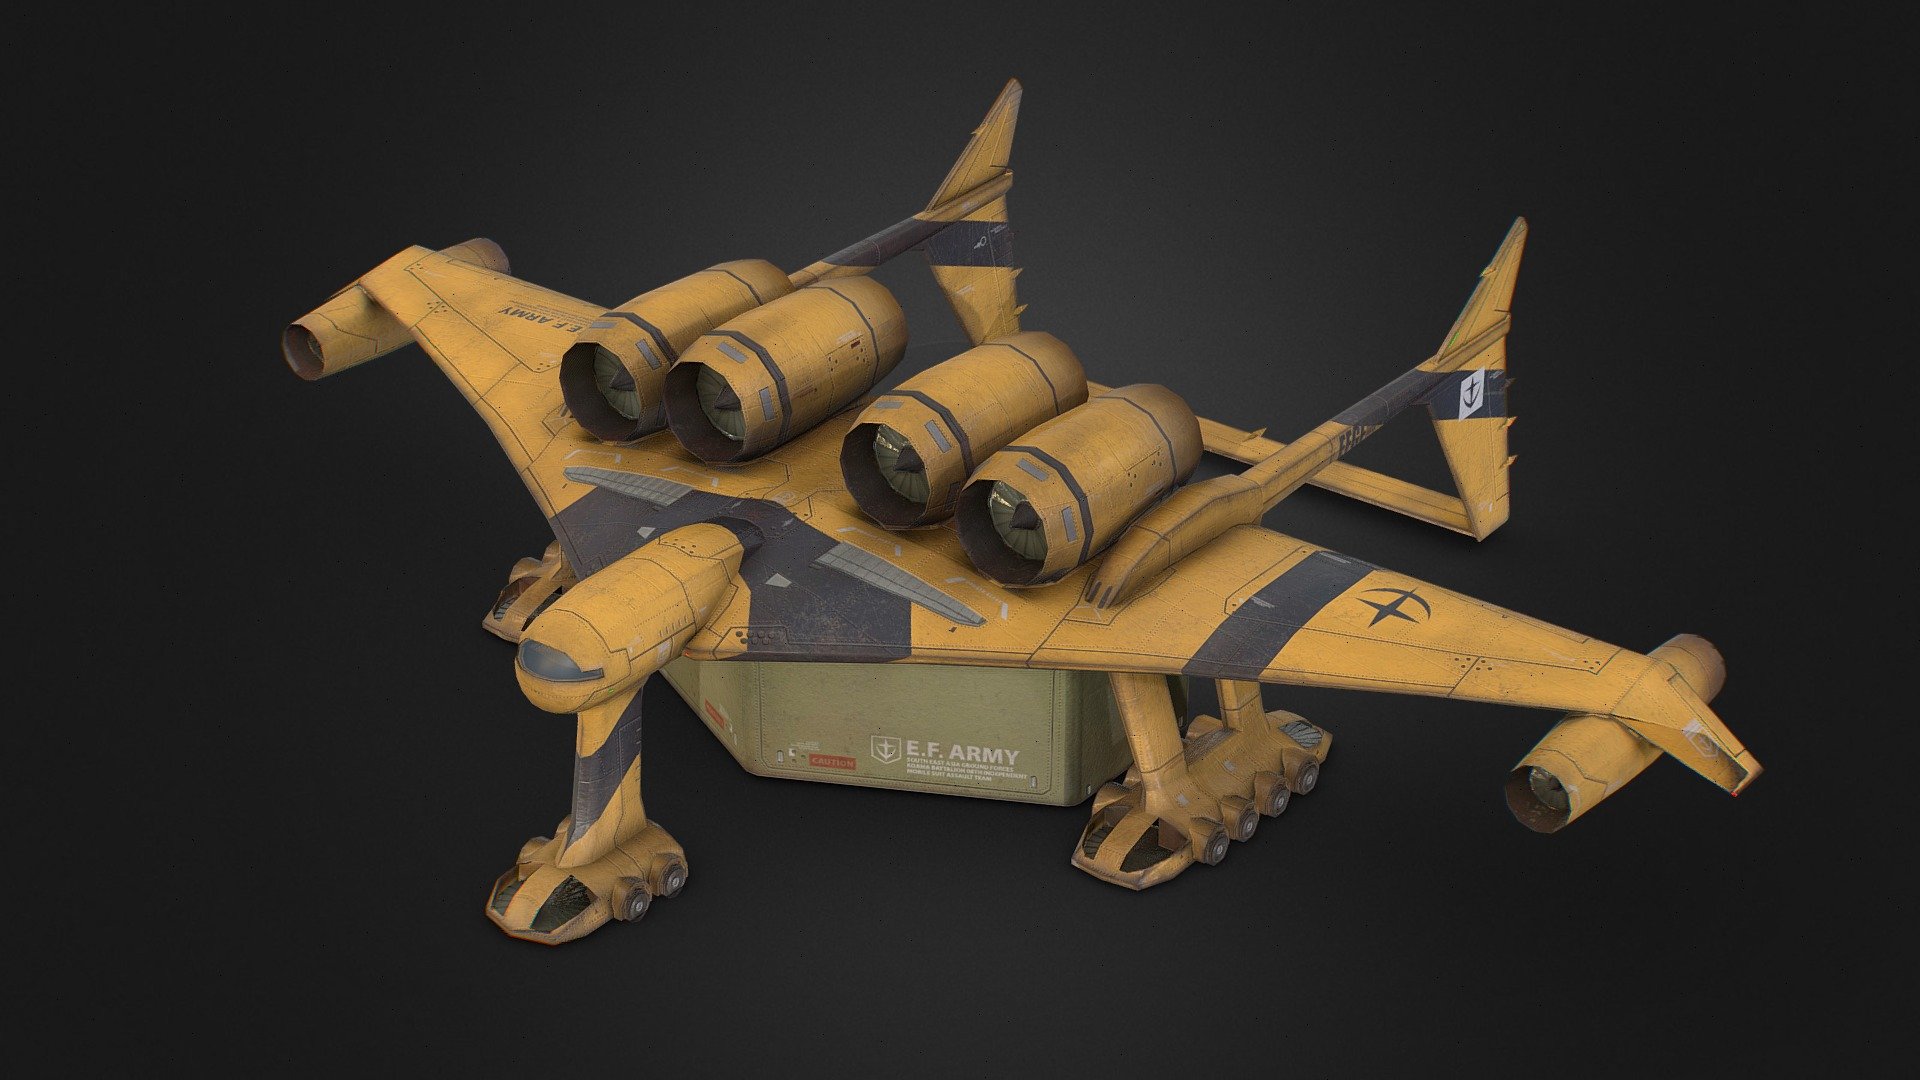 Medea Transport Plane
This model was made for One Year War mod of Hearts of Iron IV.
Our Mod Steam Home Page
https://steamcommunity.com/sharedfiles/filedetails/?id=2064985570 - Medea Transport Plane - 3D model by One Year War Mod (@hoi4oneyearwar) 3d model